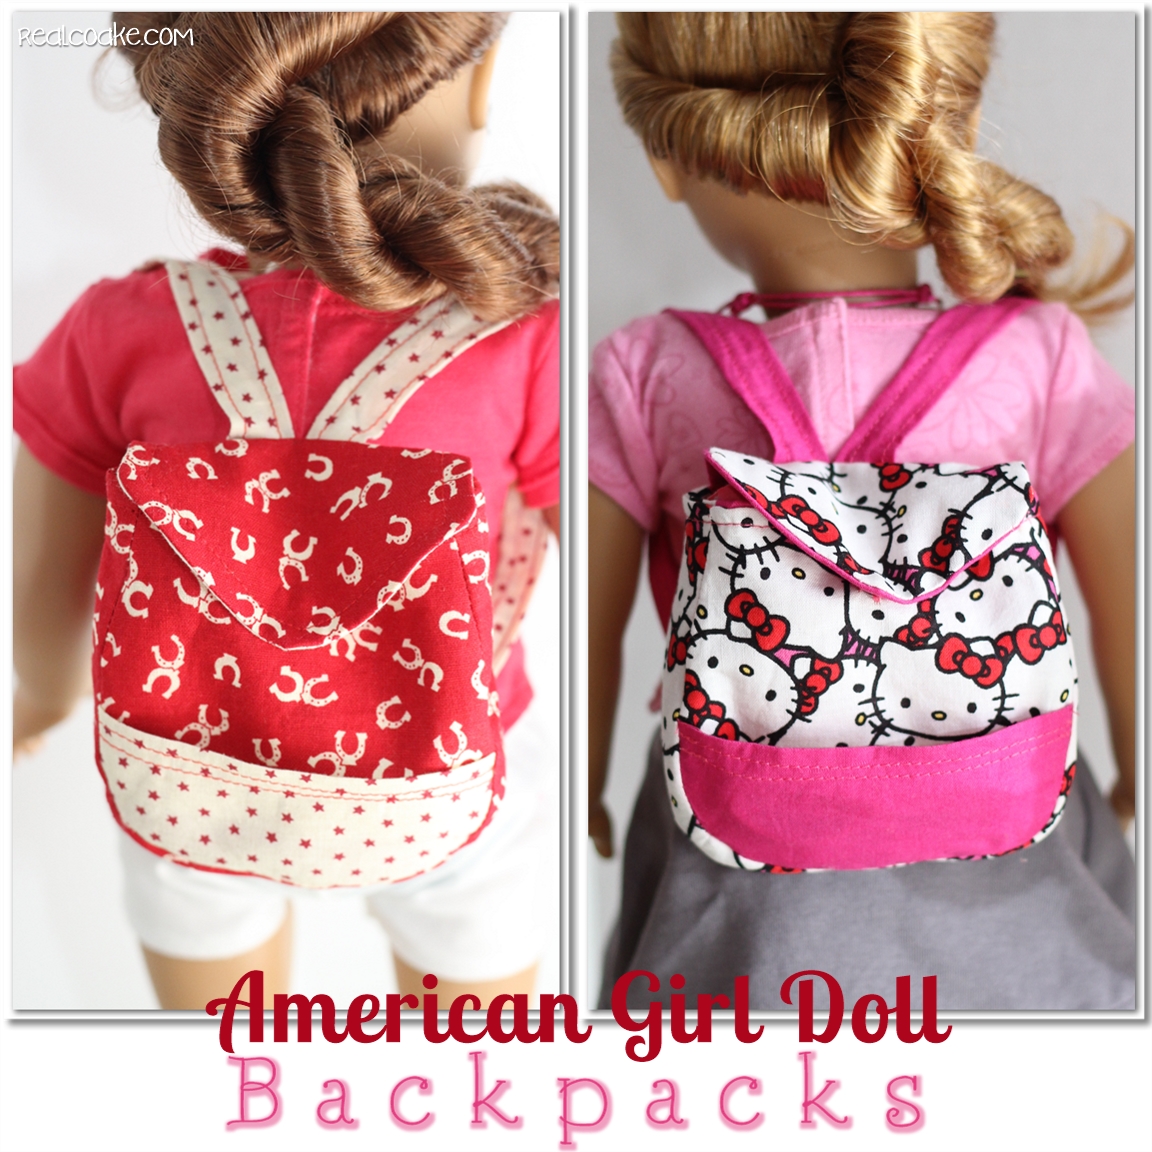 American Girl Doll pattern for cute backpacks for your dolls. #AmericanGirlDoll #Sewing #Pattern #AGDoll #RealCoake